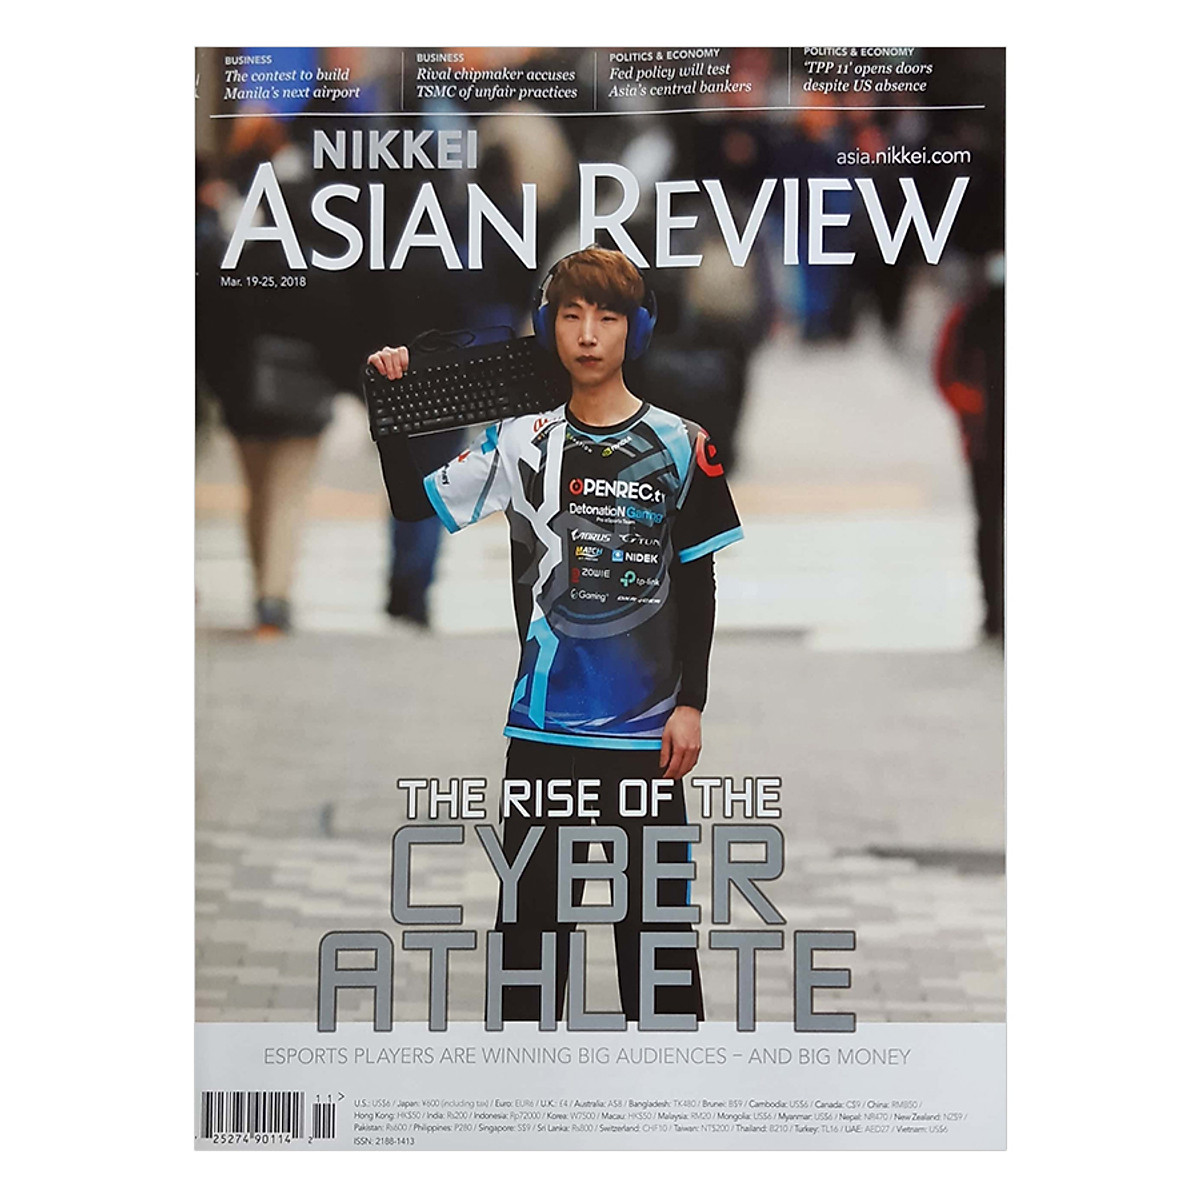 Nikkei Asian Review: The Rise Of The Cyber Athlete - 11